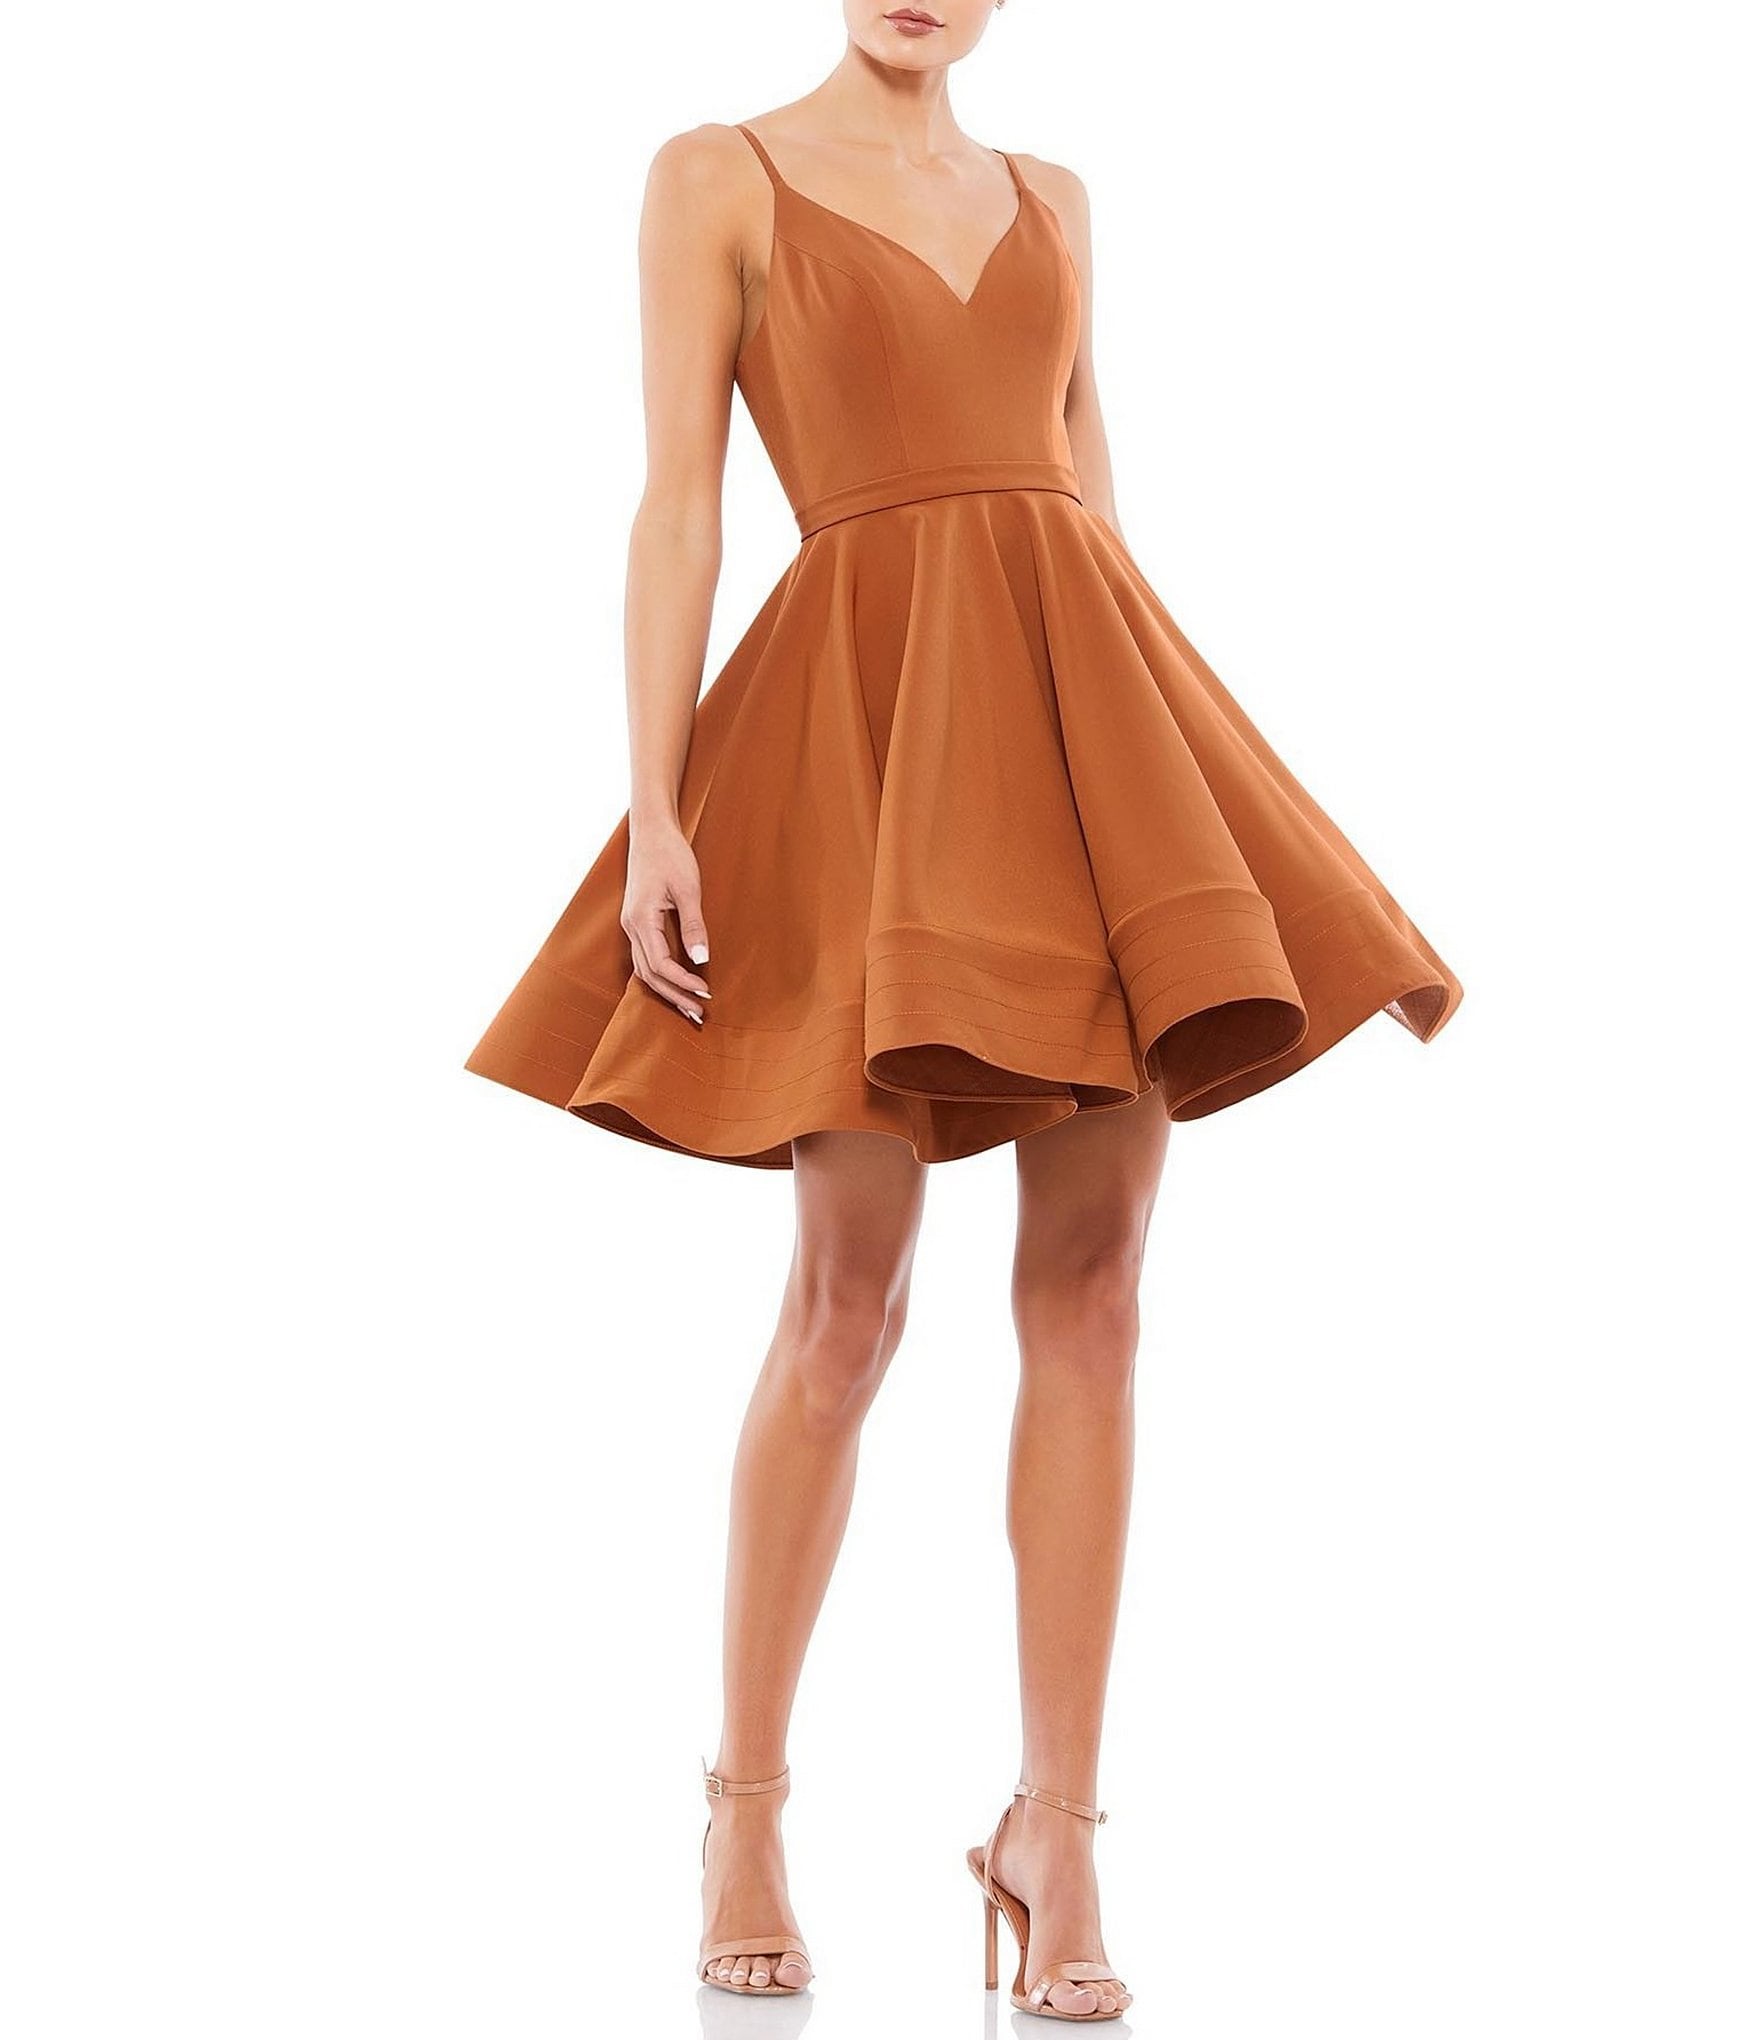 Brown Women's Cocktail ☀ Party Dresses ...